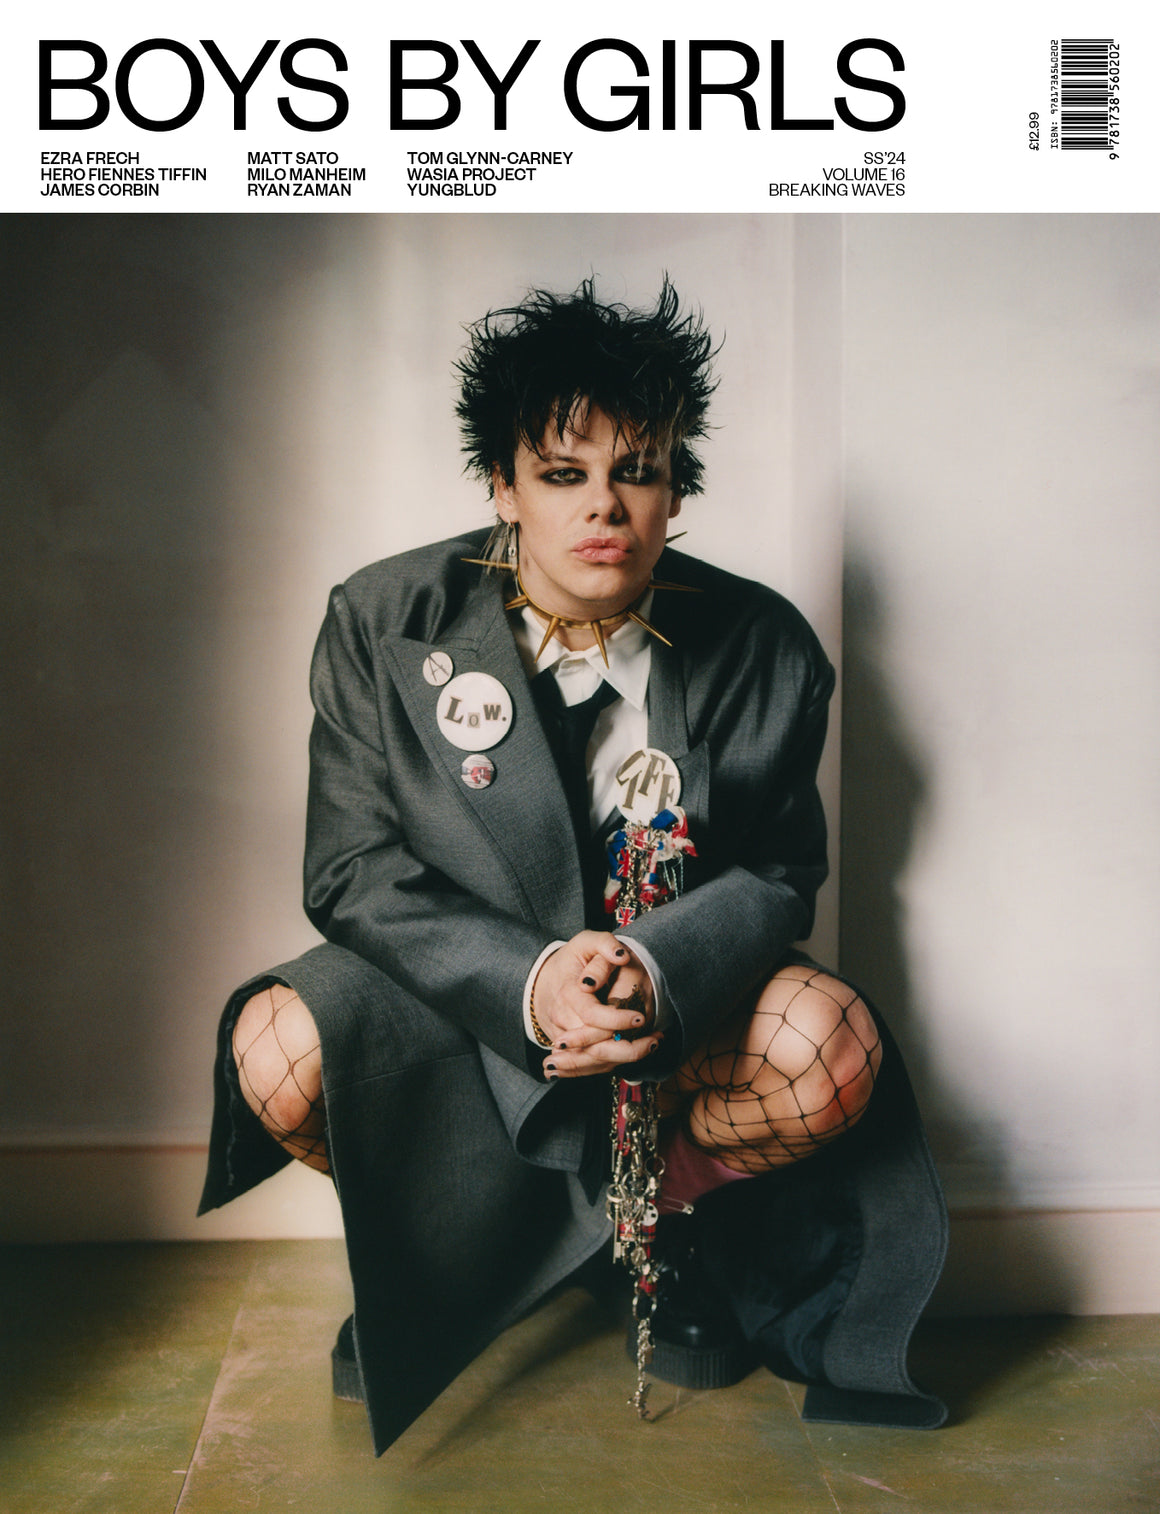 BOYS BY GIRLS ISSUE 16 | BREAKING WAVES | PRINT ISSUE | YUNGBLUD COVER